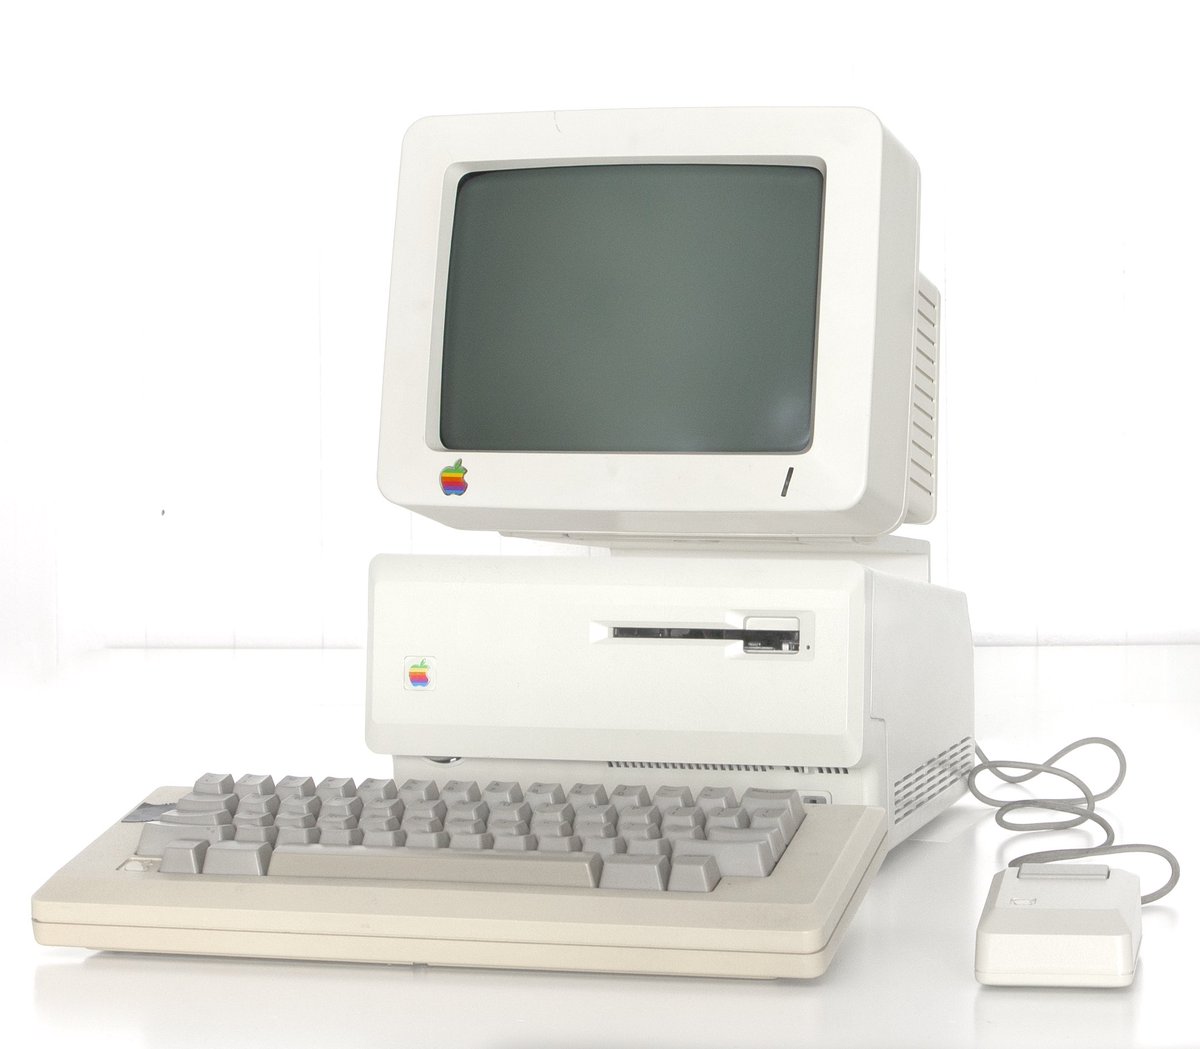 In 1985, Apple tried to make a low budget Macintosh and introduced the Macintosh Mini. It could be paired with the existing Apple Monitor IIc like in this photo. #MARCHintosh